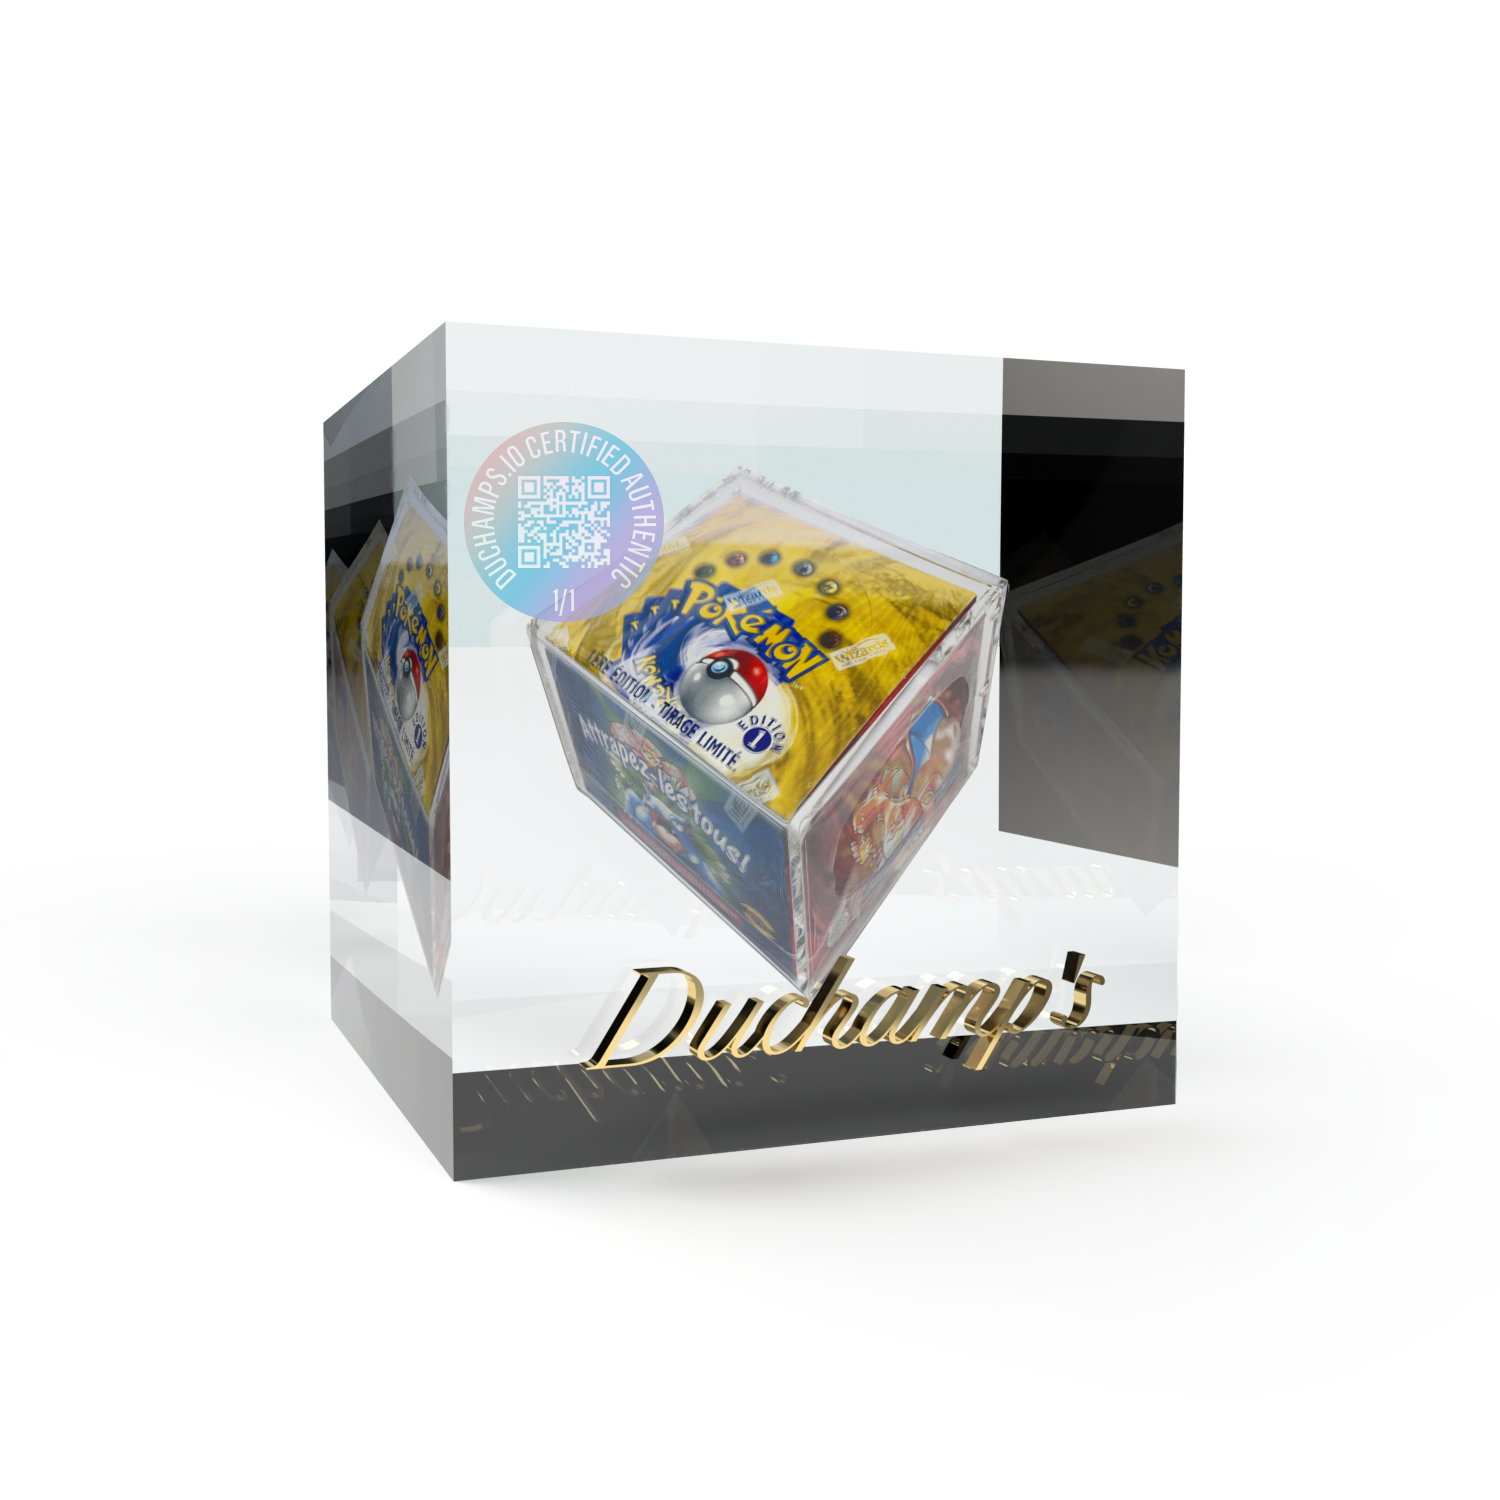 The NFT for Duchamp's first lot, a 1999 Pokémon First Edition French Sealed Base Set Booster Box.